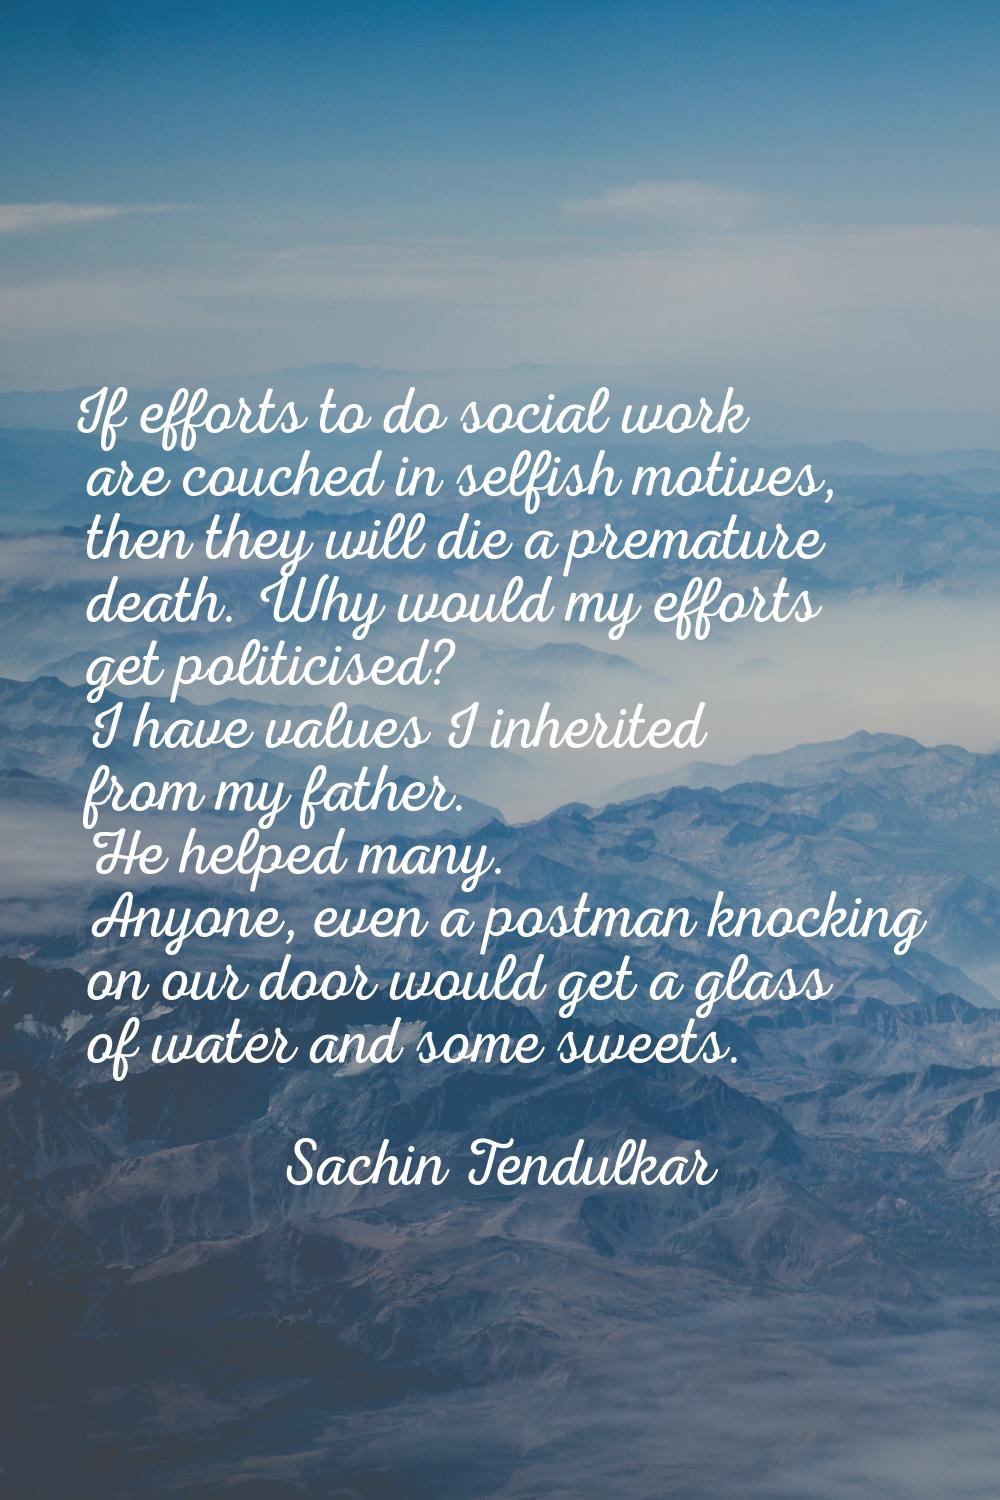 If efforts to do social work are couched in selfish motives, then they will die a premature death. 